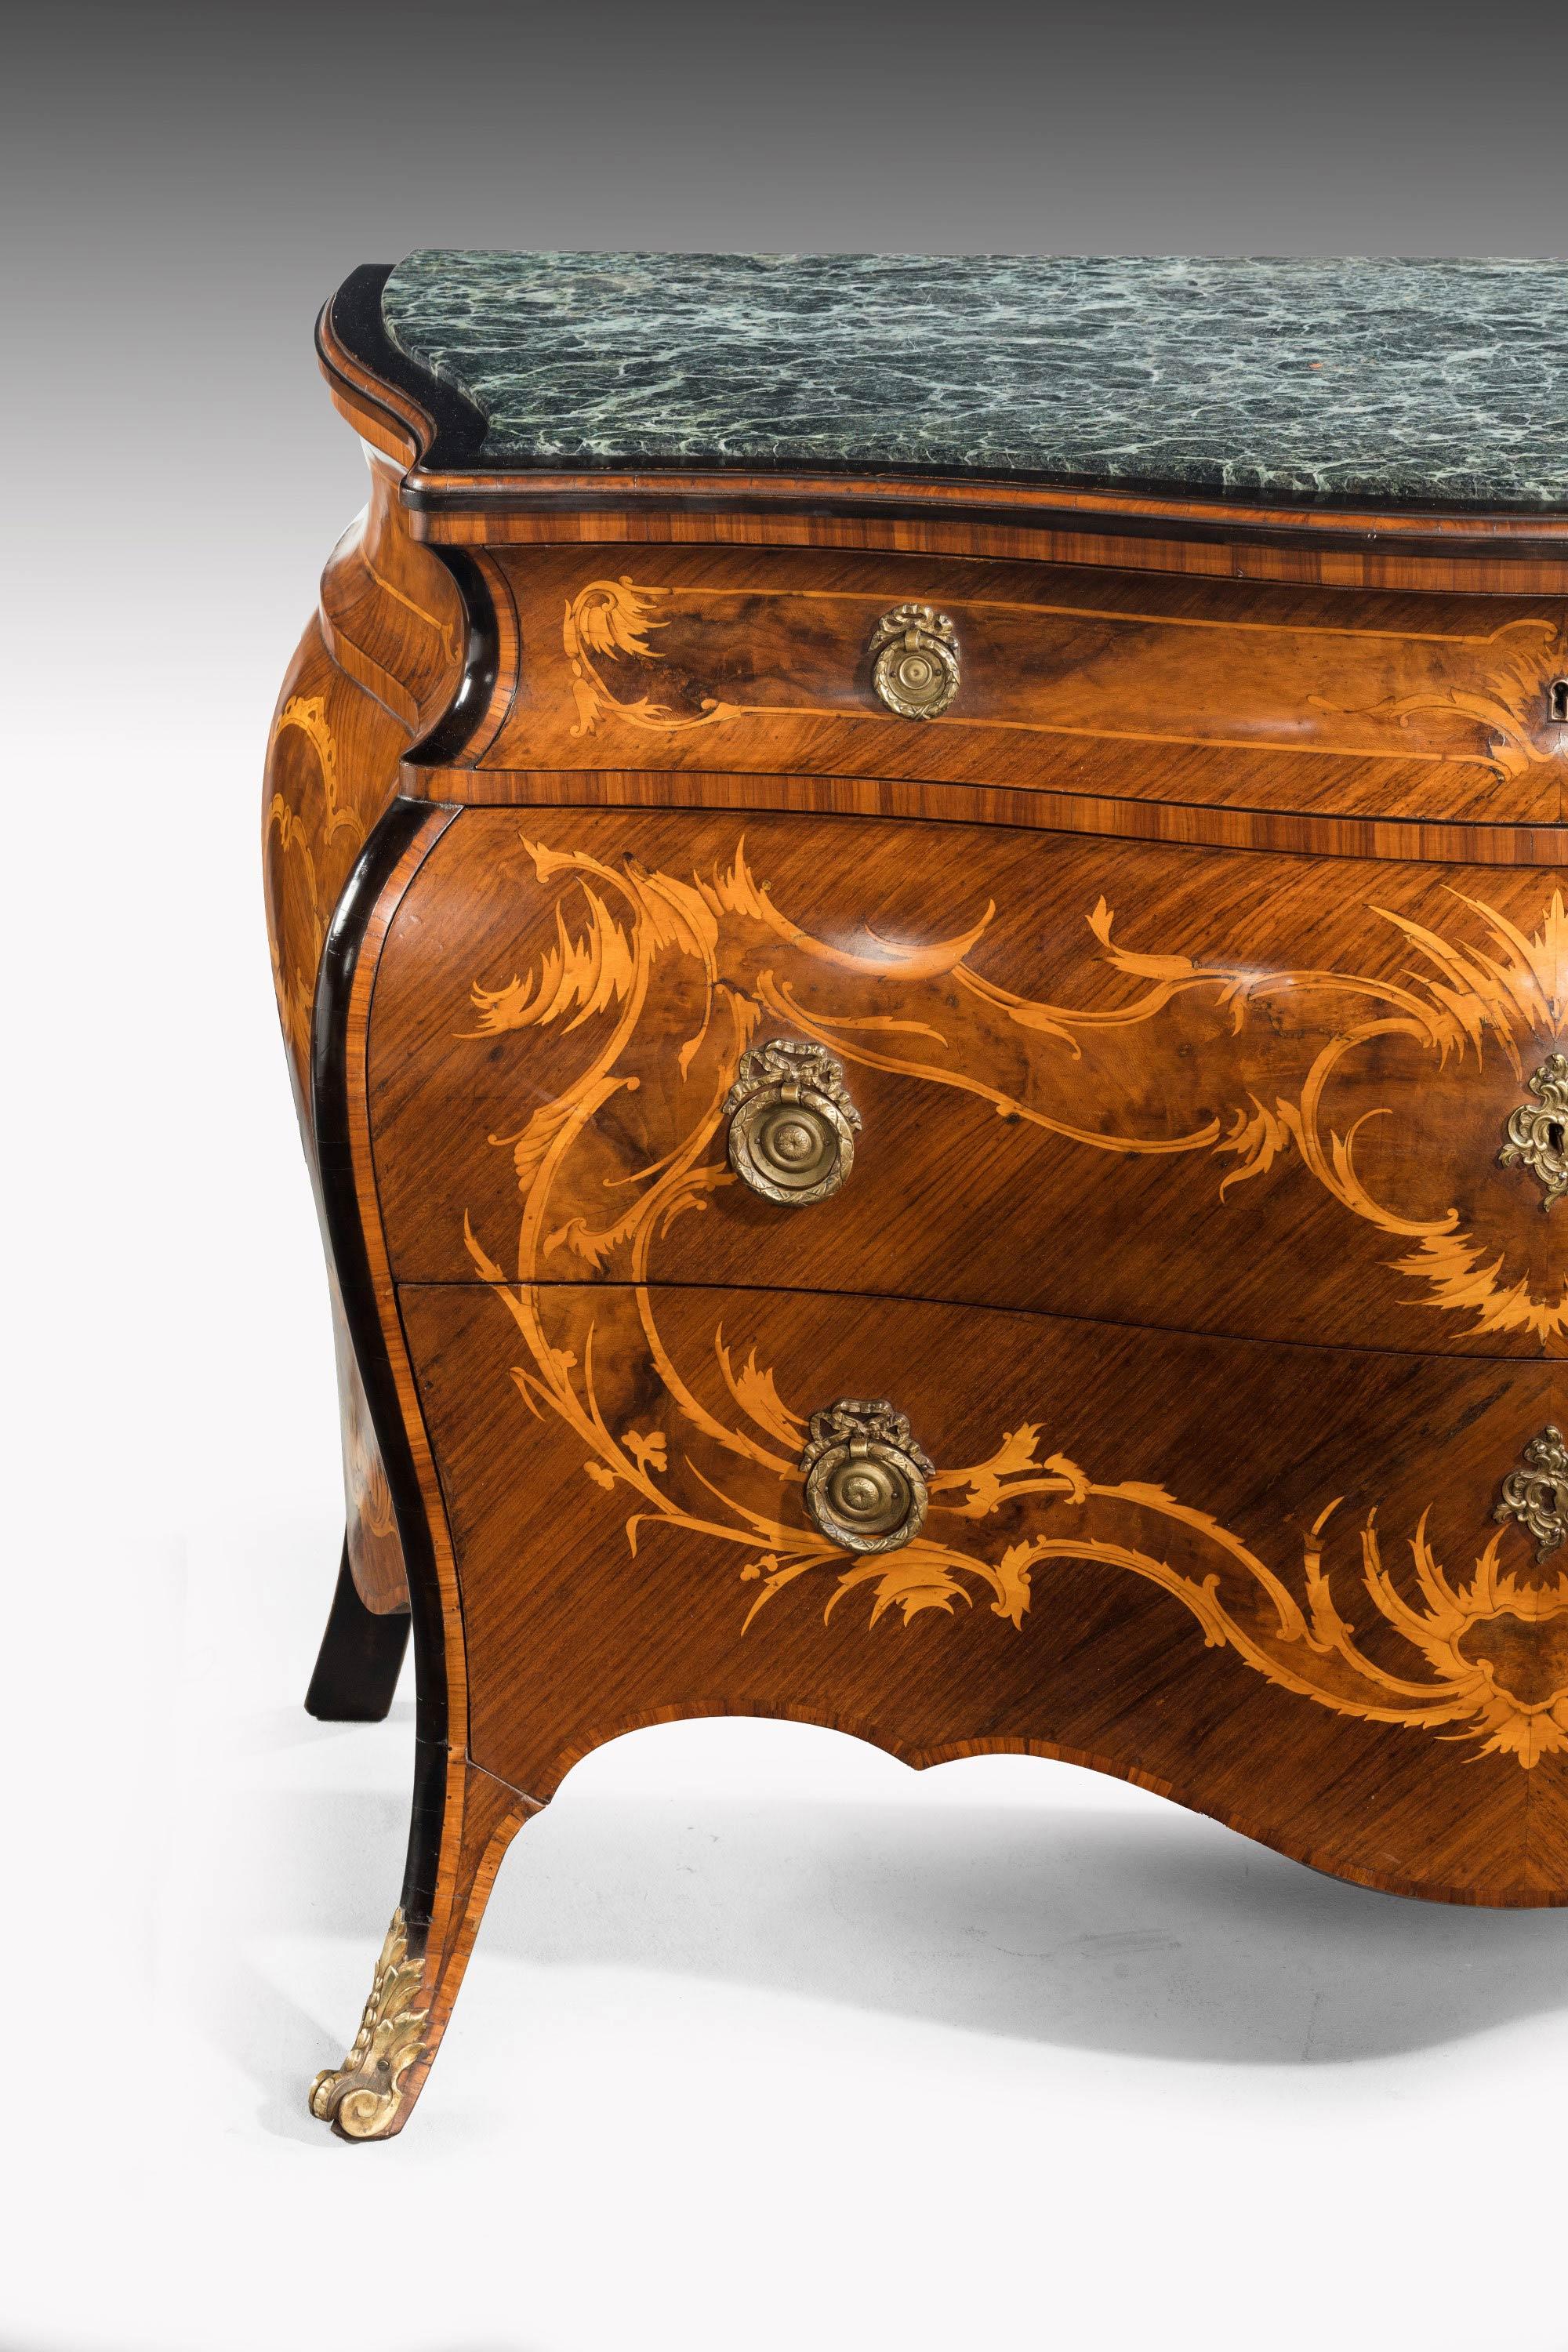 A good pair of Northern European continental walnut parquetry and marquetry commodes in the 18th century style. Each retaining a marble top inset and above three drawers with figured marquetry inlay. Attractively patinated and with the original